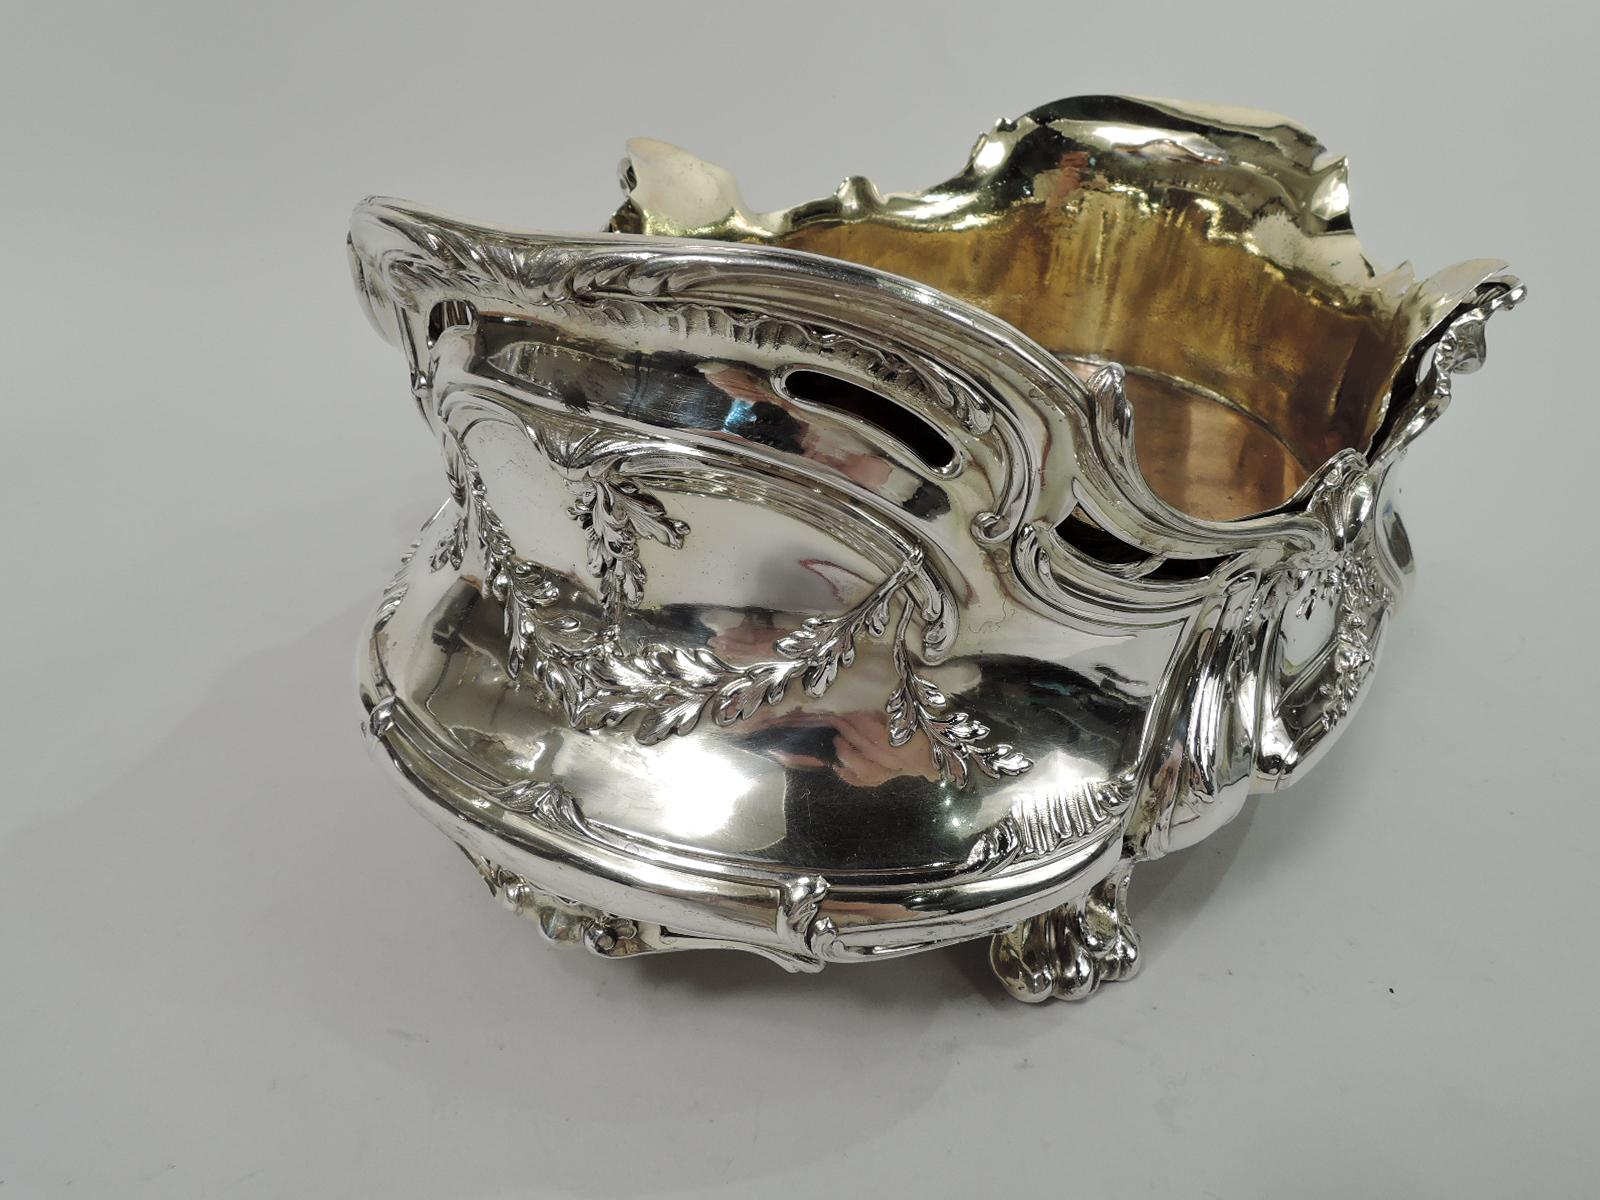 Belle Epoque Rococo 950 silver jardiniere. Made by Edmond Tetard in France, and imported to Scotland in 1898 by Edward & Sons in Glasgow. Oval and bellied with asymmetrical and open rim. Chased flowers, leaves, and shells, and leaf-bordered